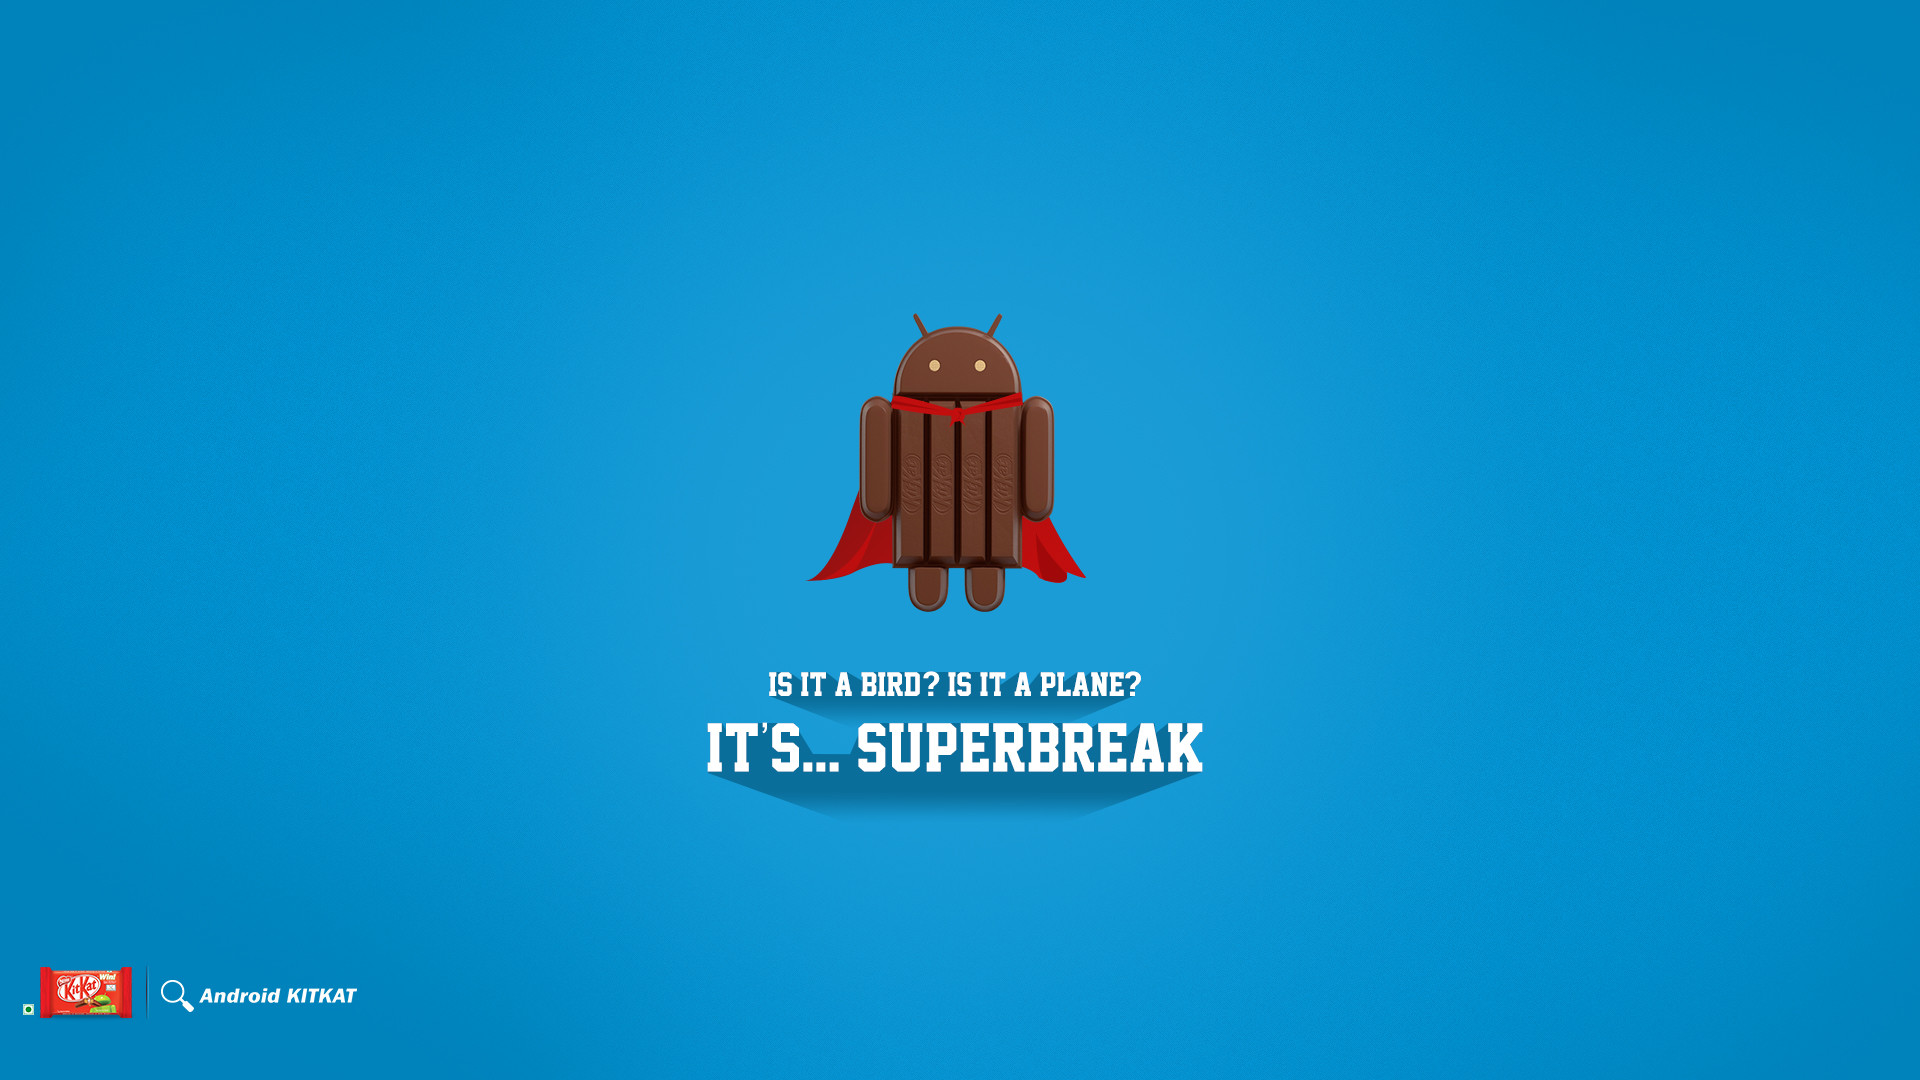 android kitkat wallpaper hd for desktop | View HD